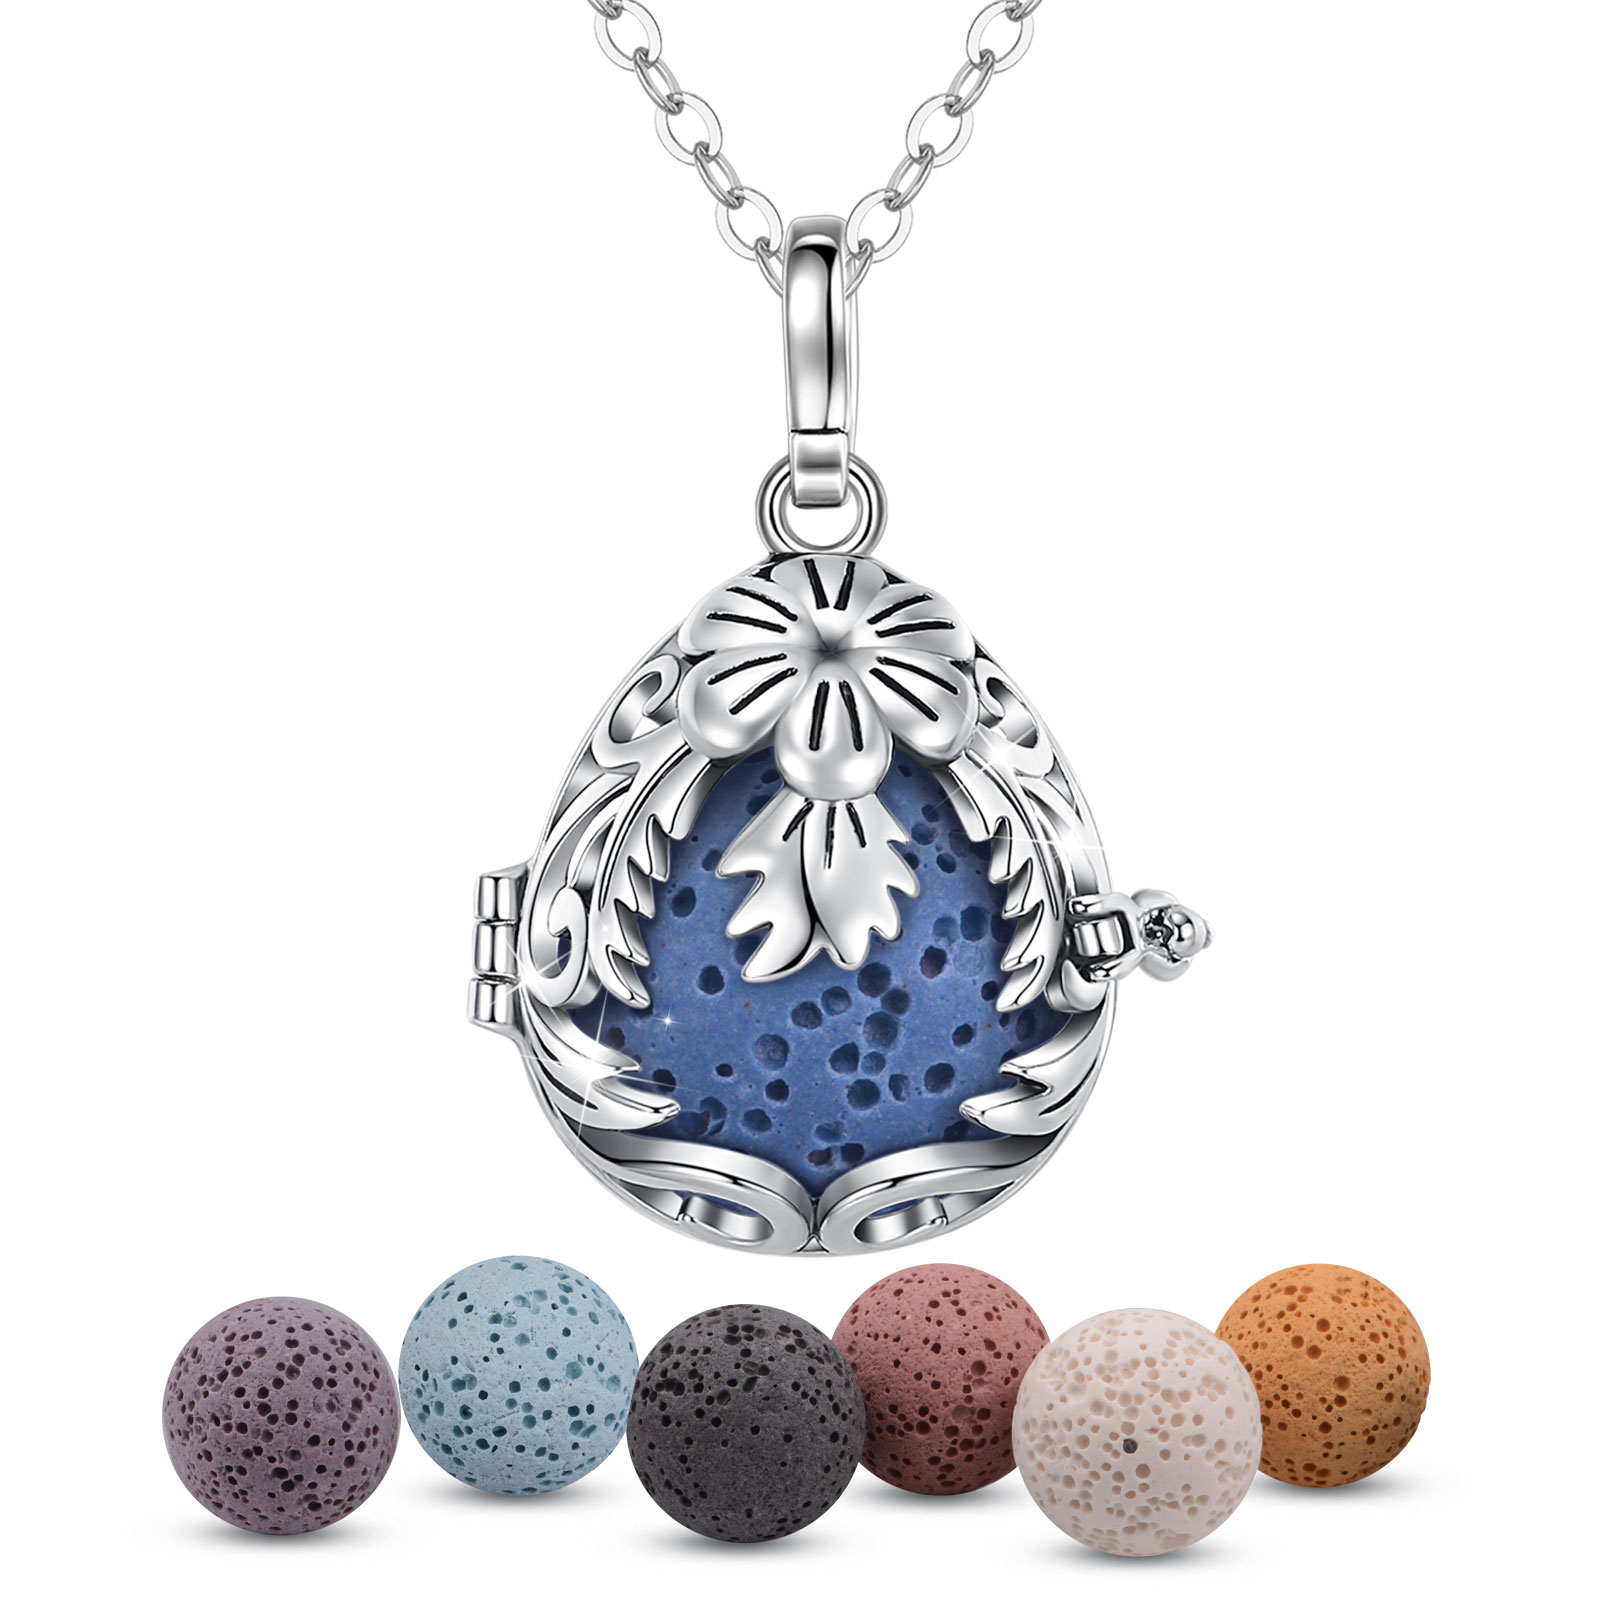 Merryshine Jewelry S925 Sterling Silver Lava Rock Stone Essential Oil Aromatherapy Diffuser Necklace for Women